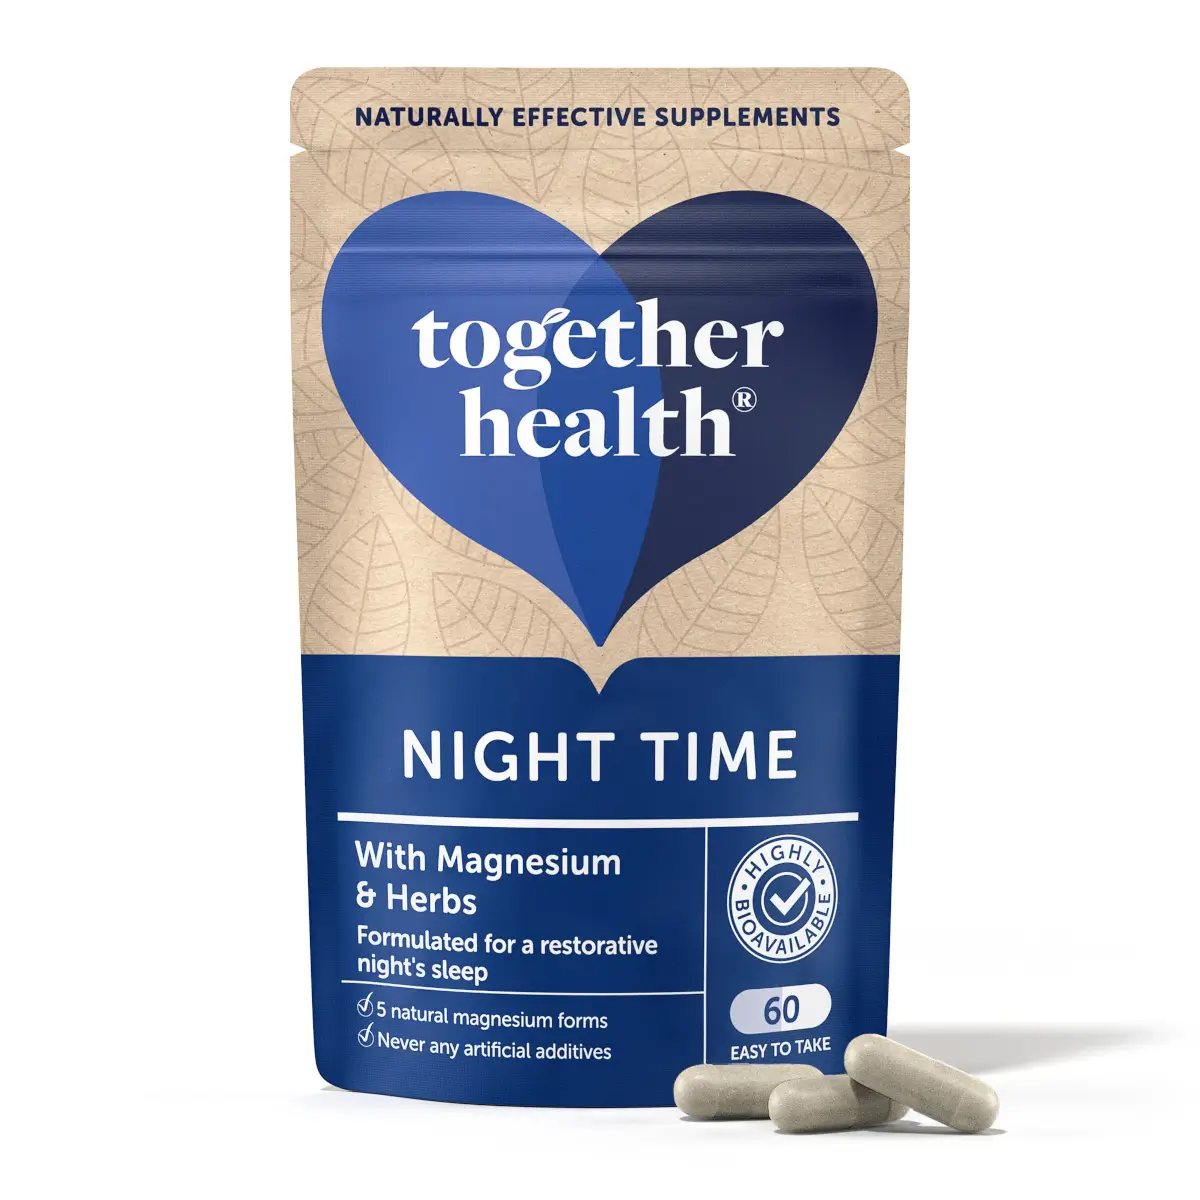 WELLNESS Together Health OceanPureT Night Time Magnesium Complex 60 caps £12.99